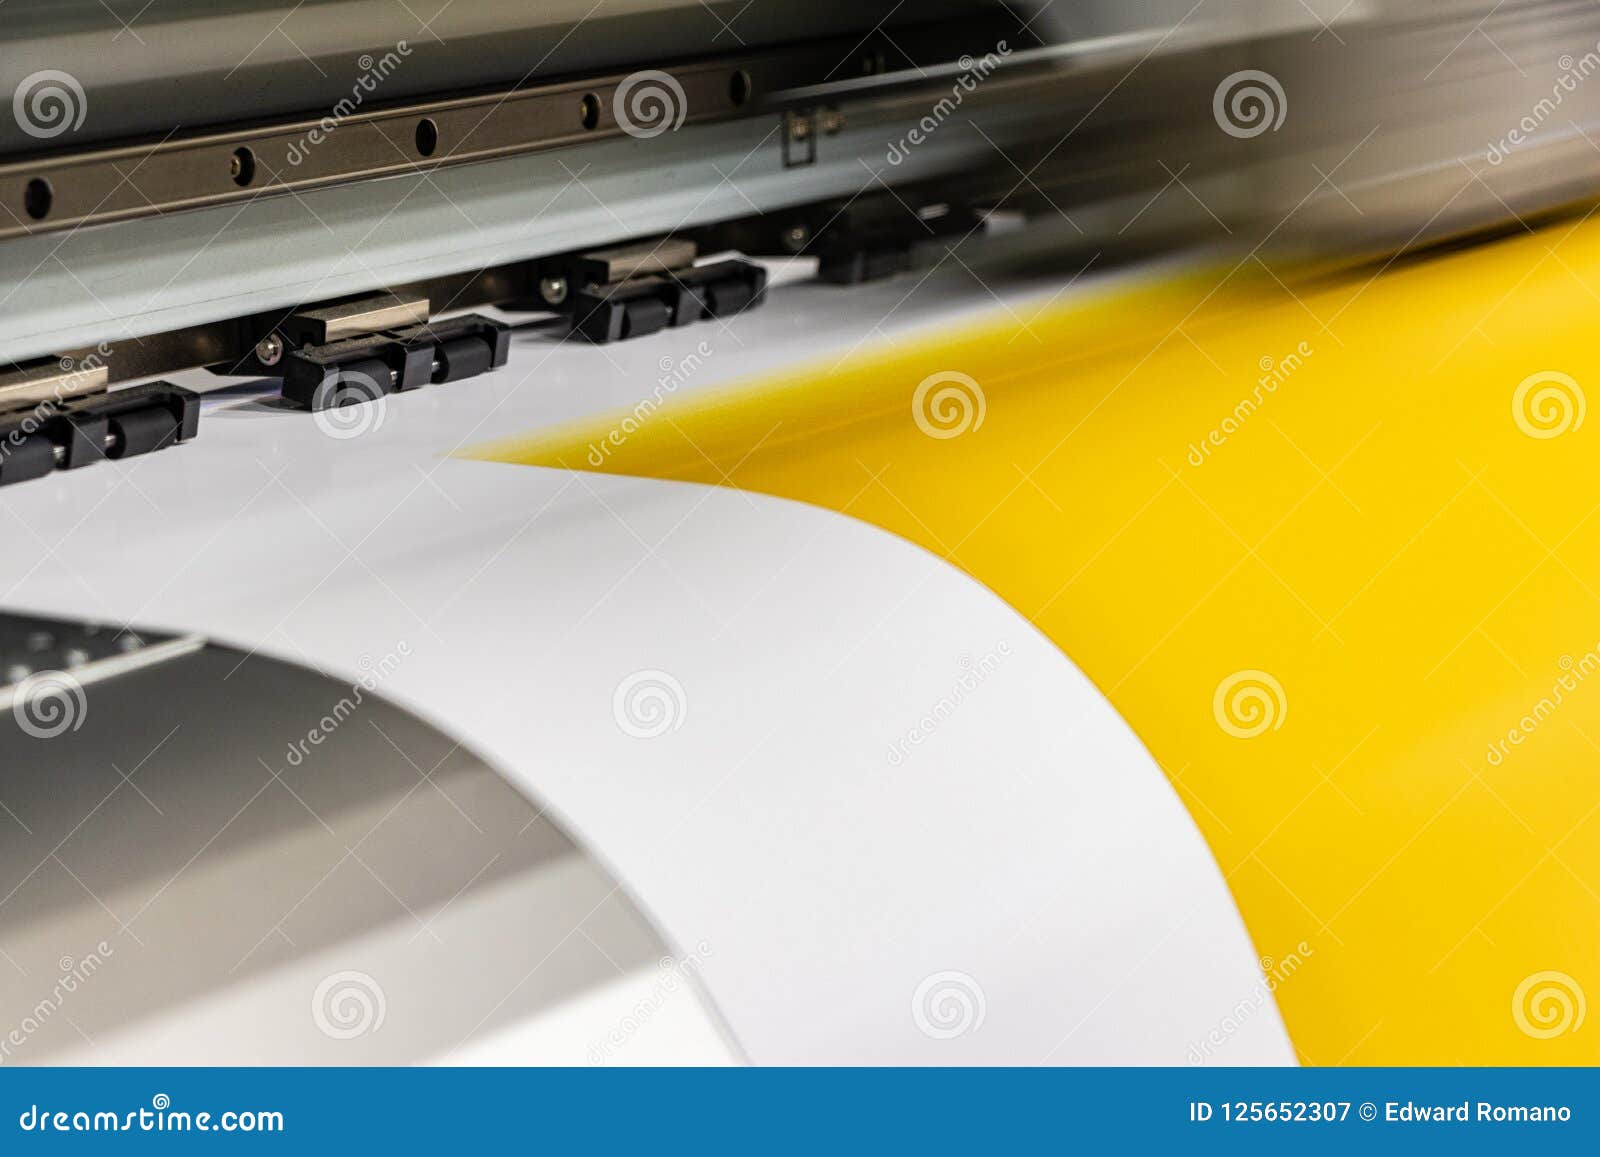 big professional printer, processing a large scale glossy sheet of yellow paper rolls for color sampling.